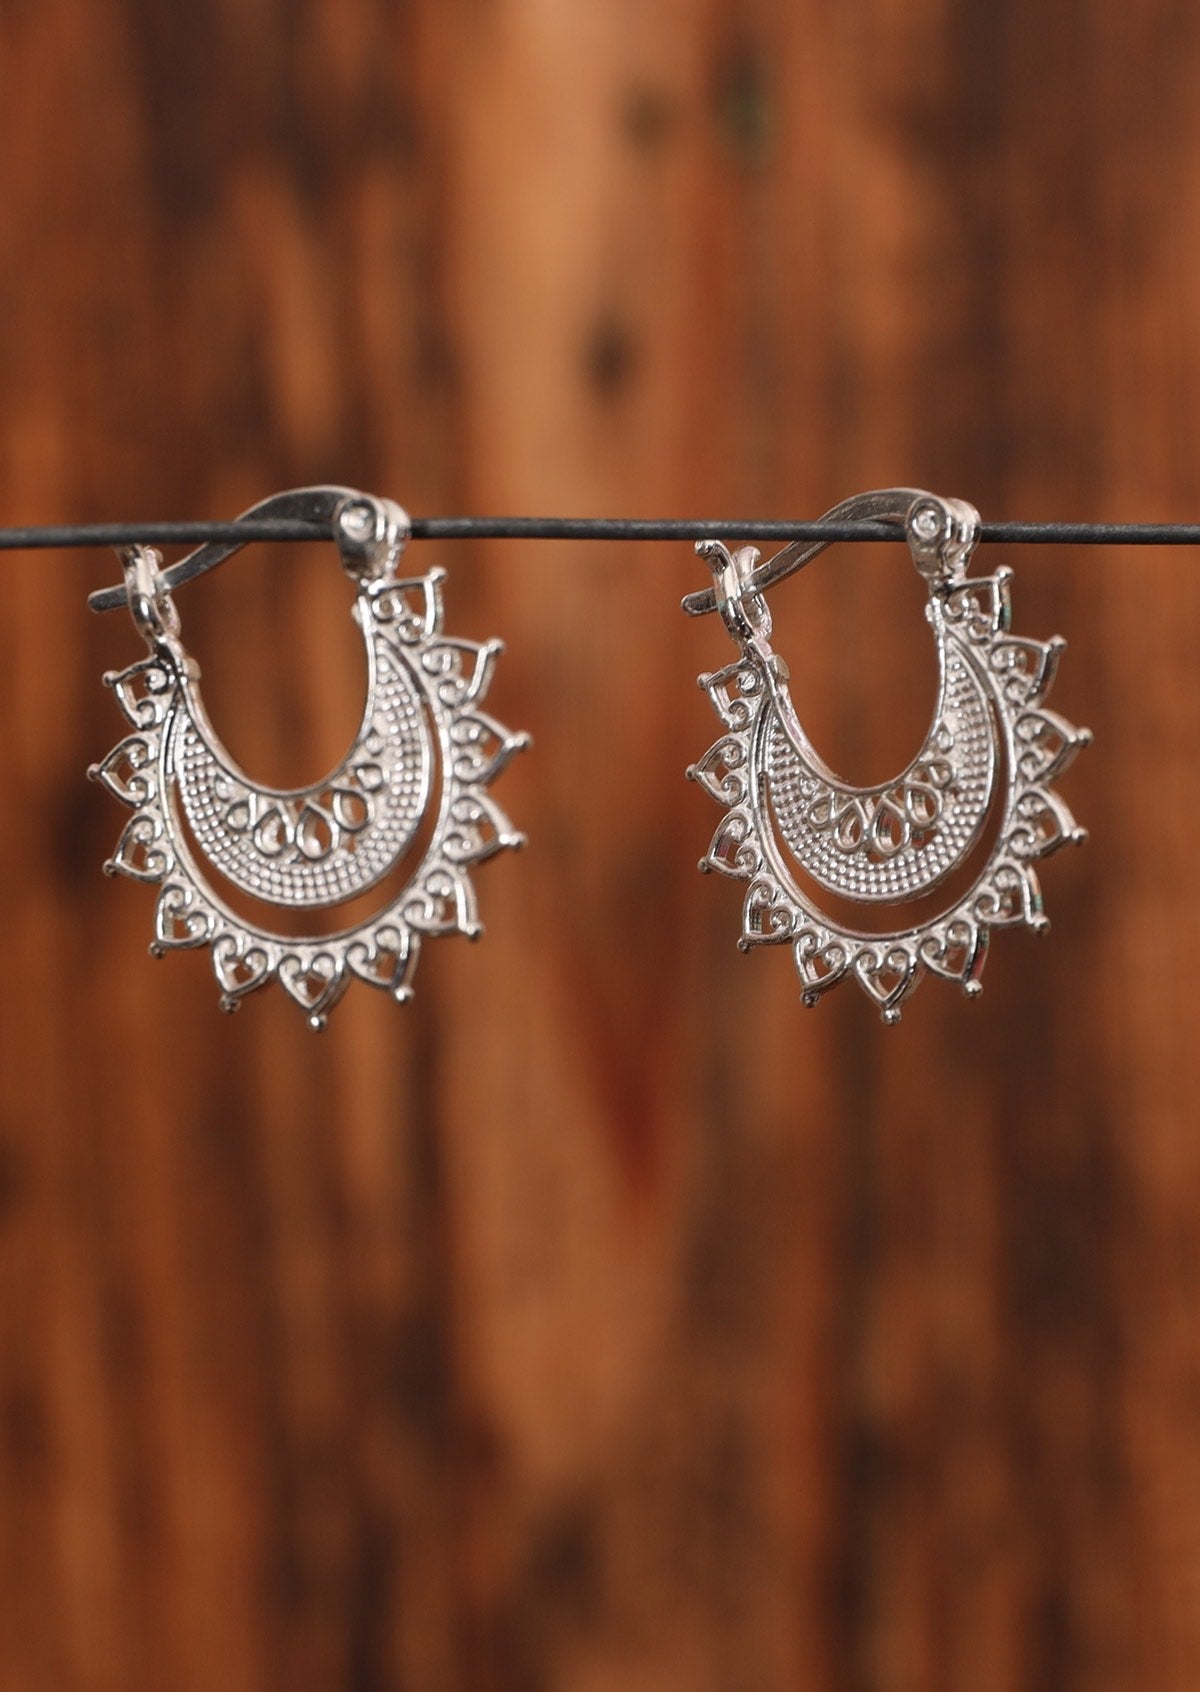 92.5% silver layered lace earrings with a latch clasp sitting on wire for display.